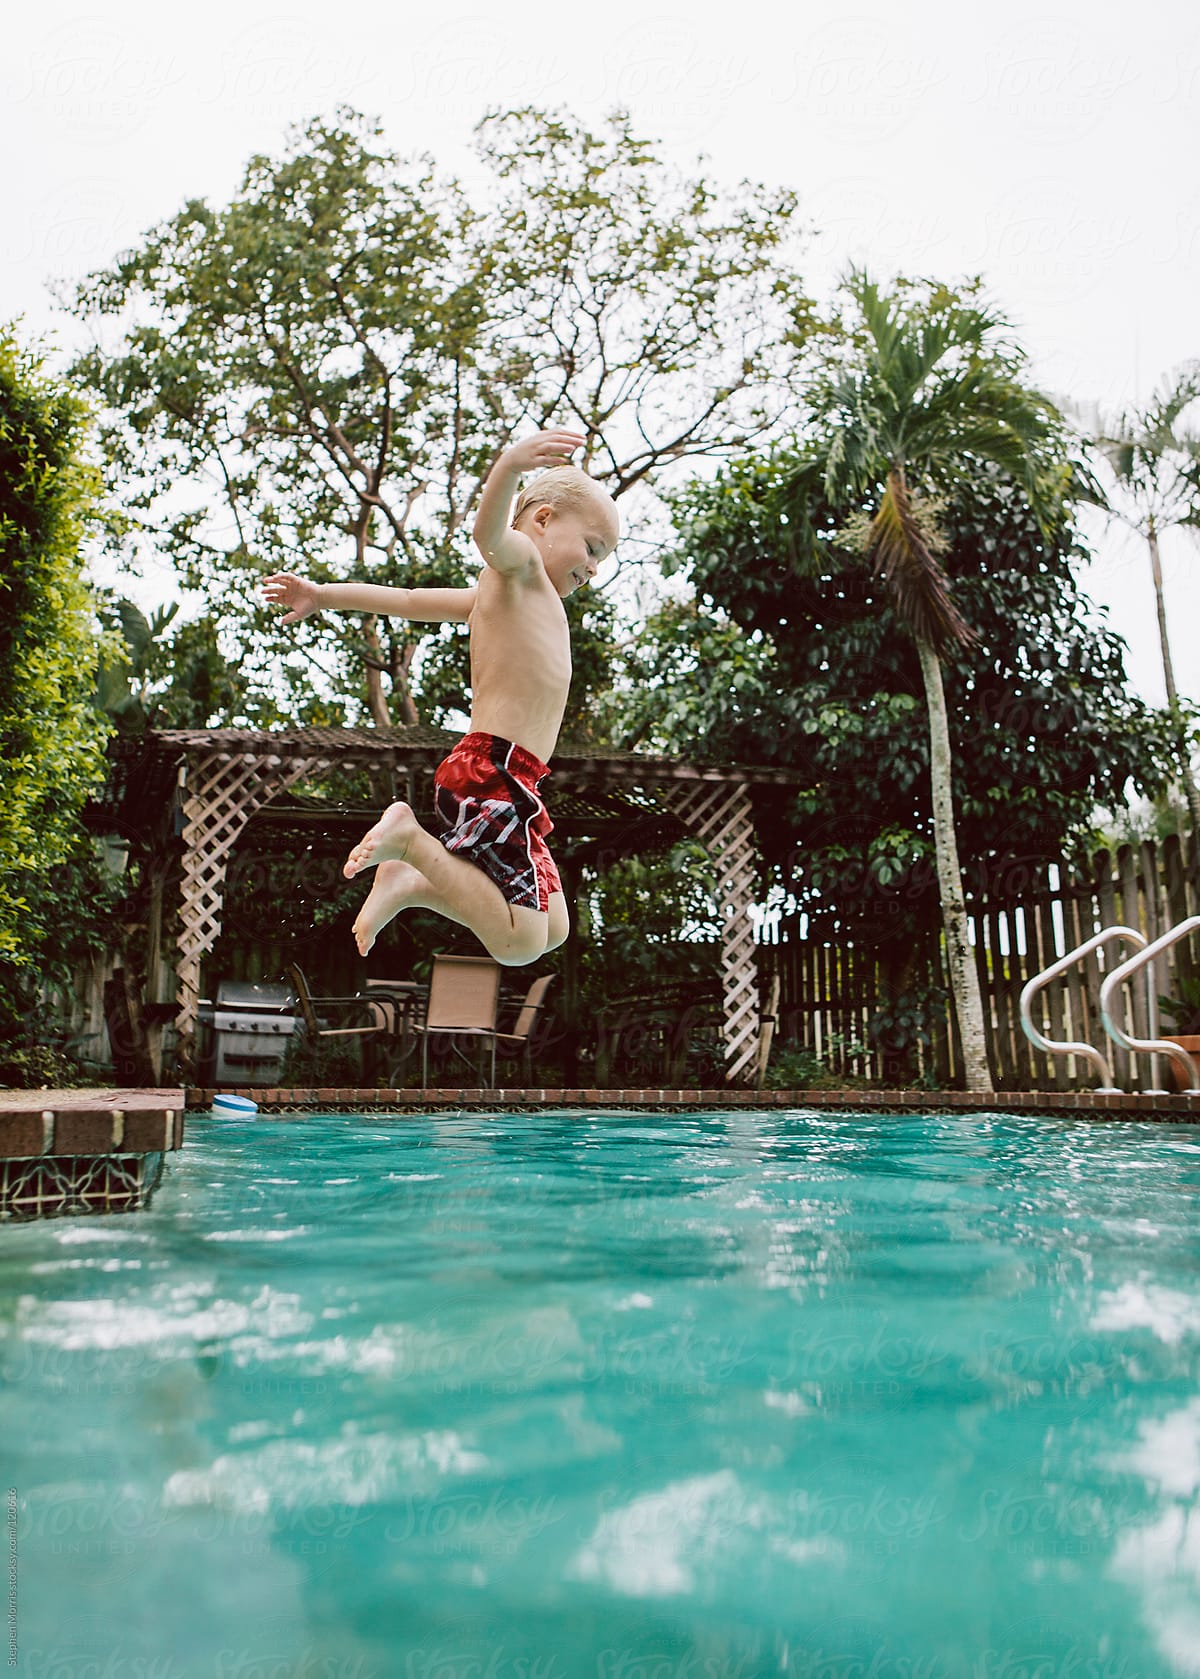 Boy jumping into pool